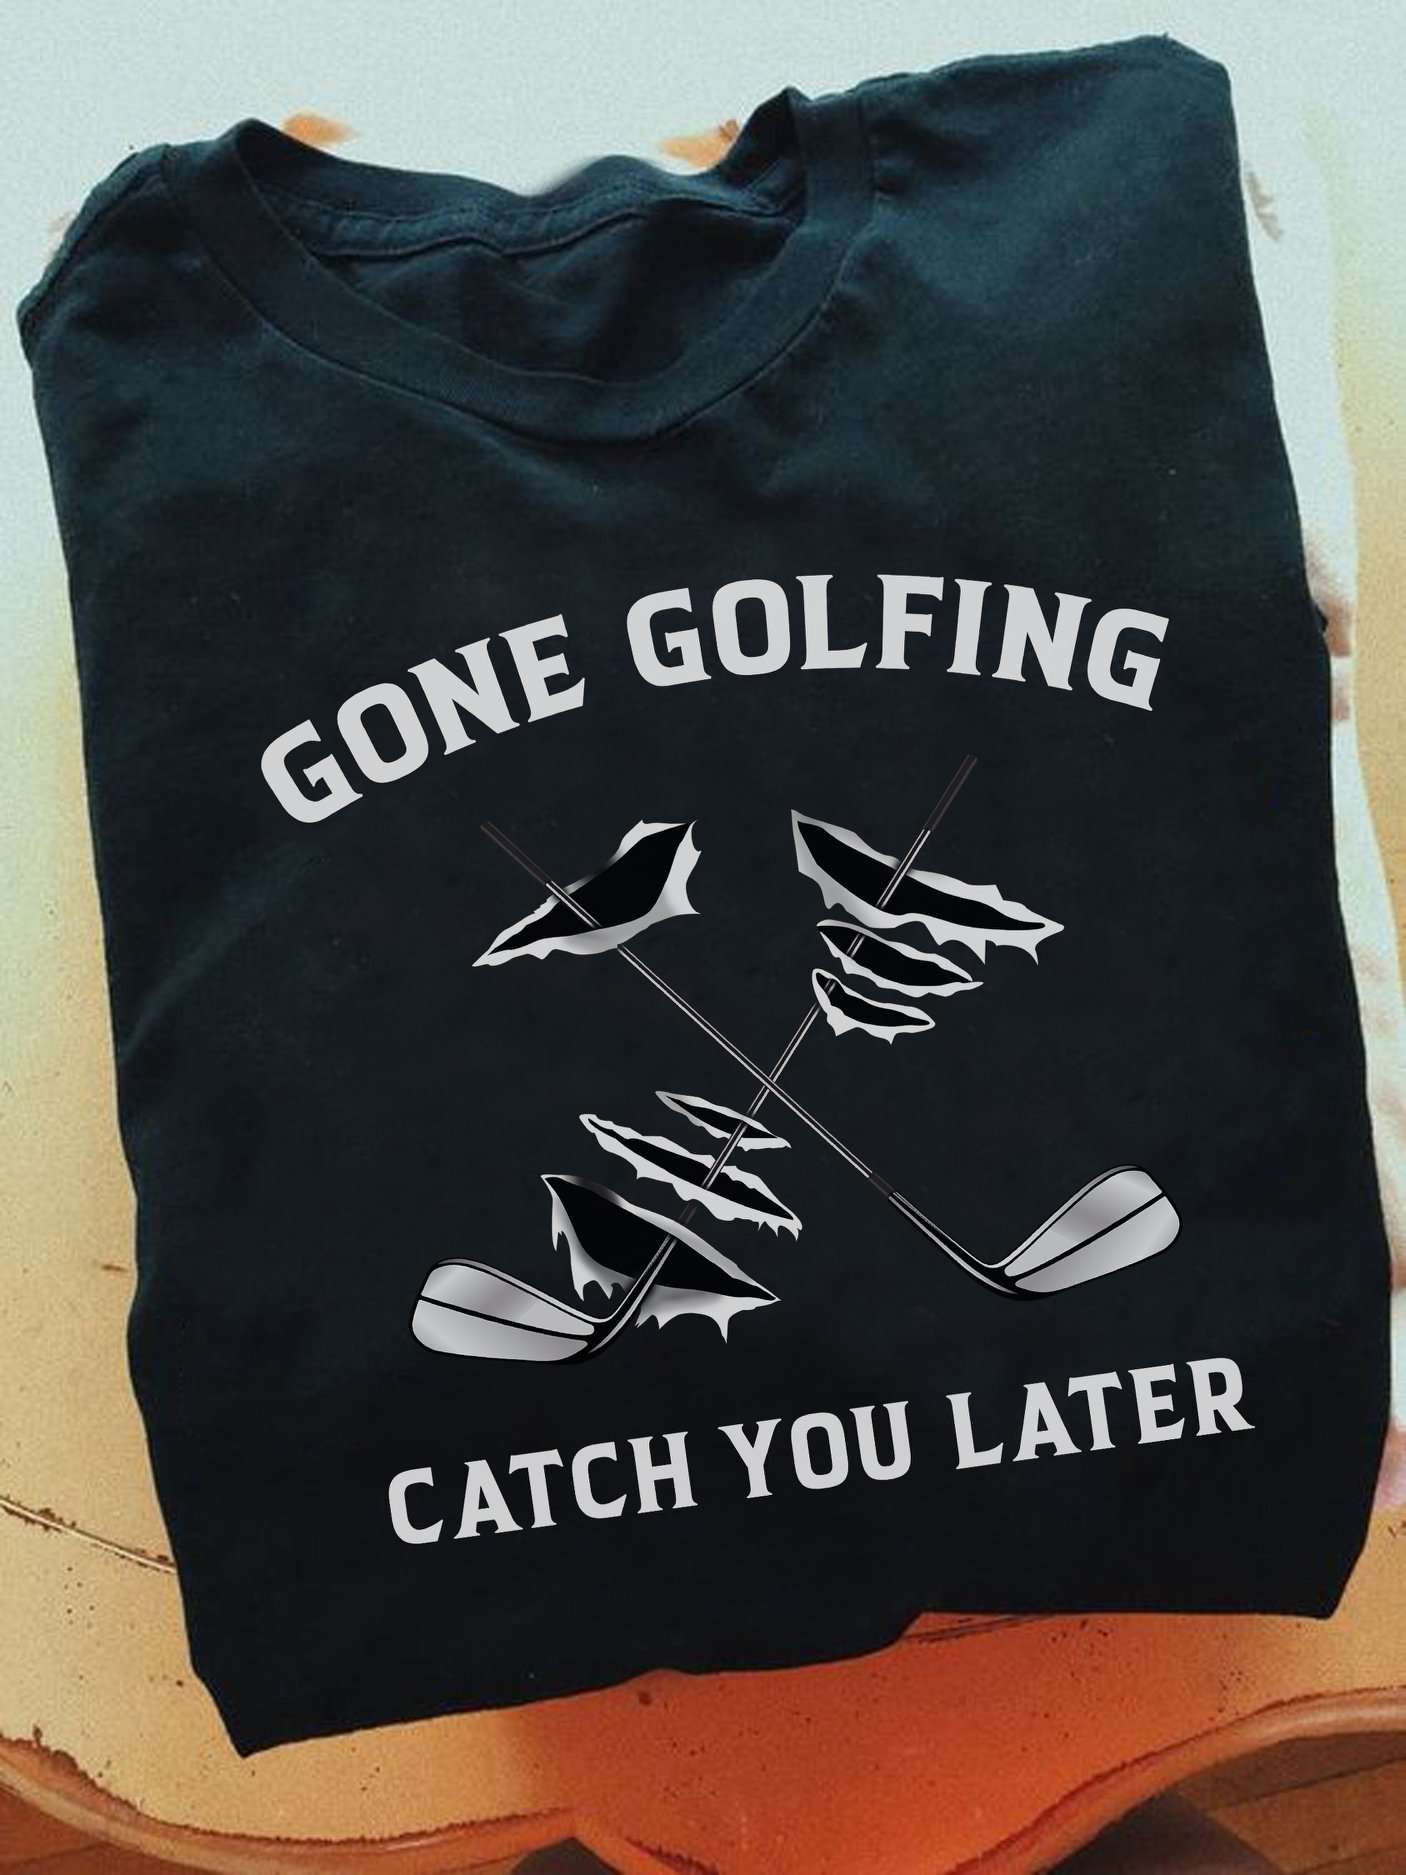 Gone golfing, catch you later - Addicted to golf, love playing golf